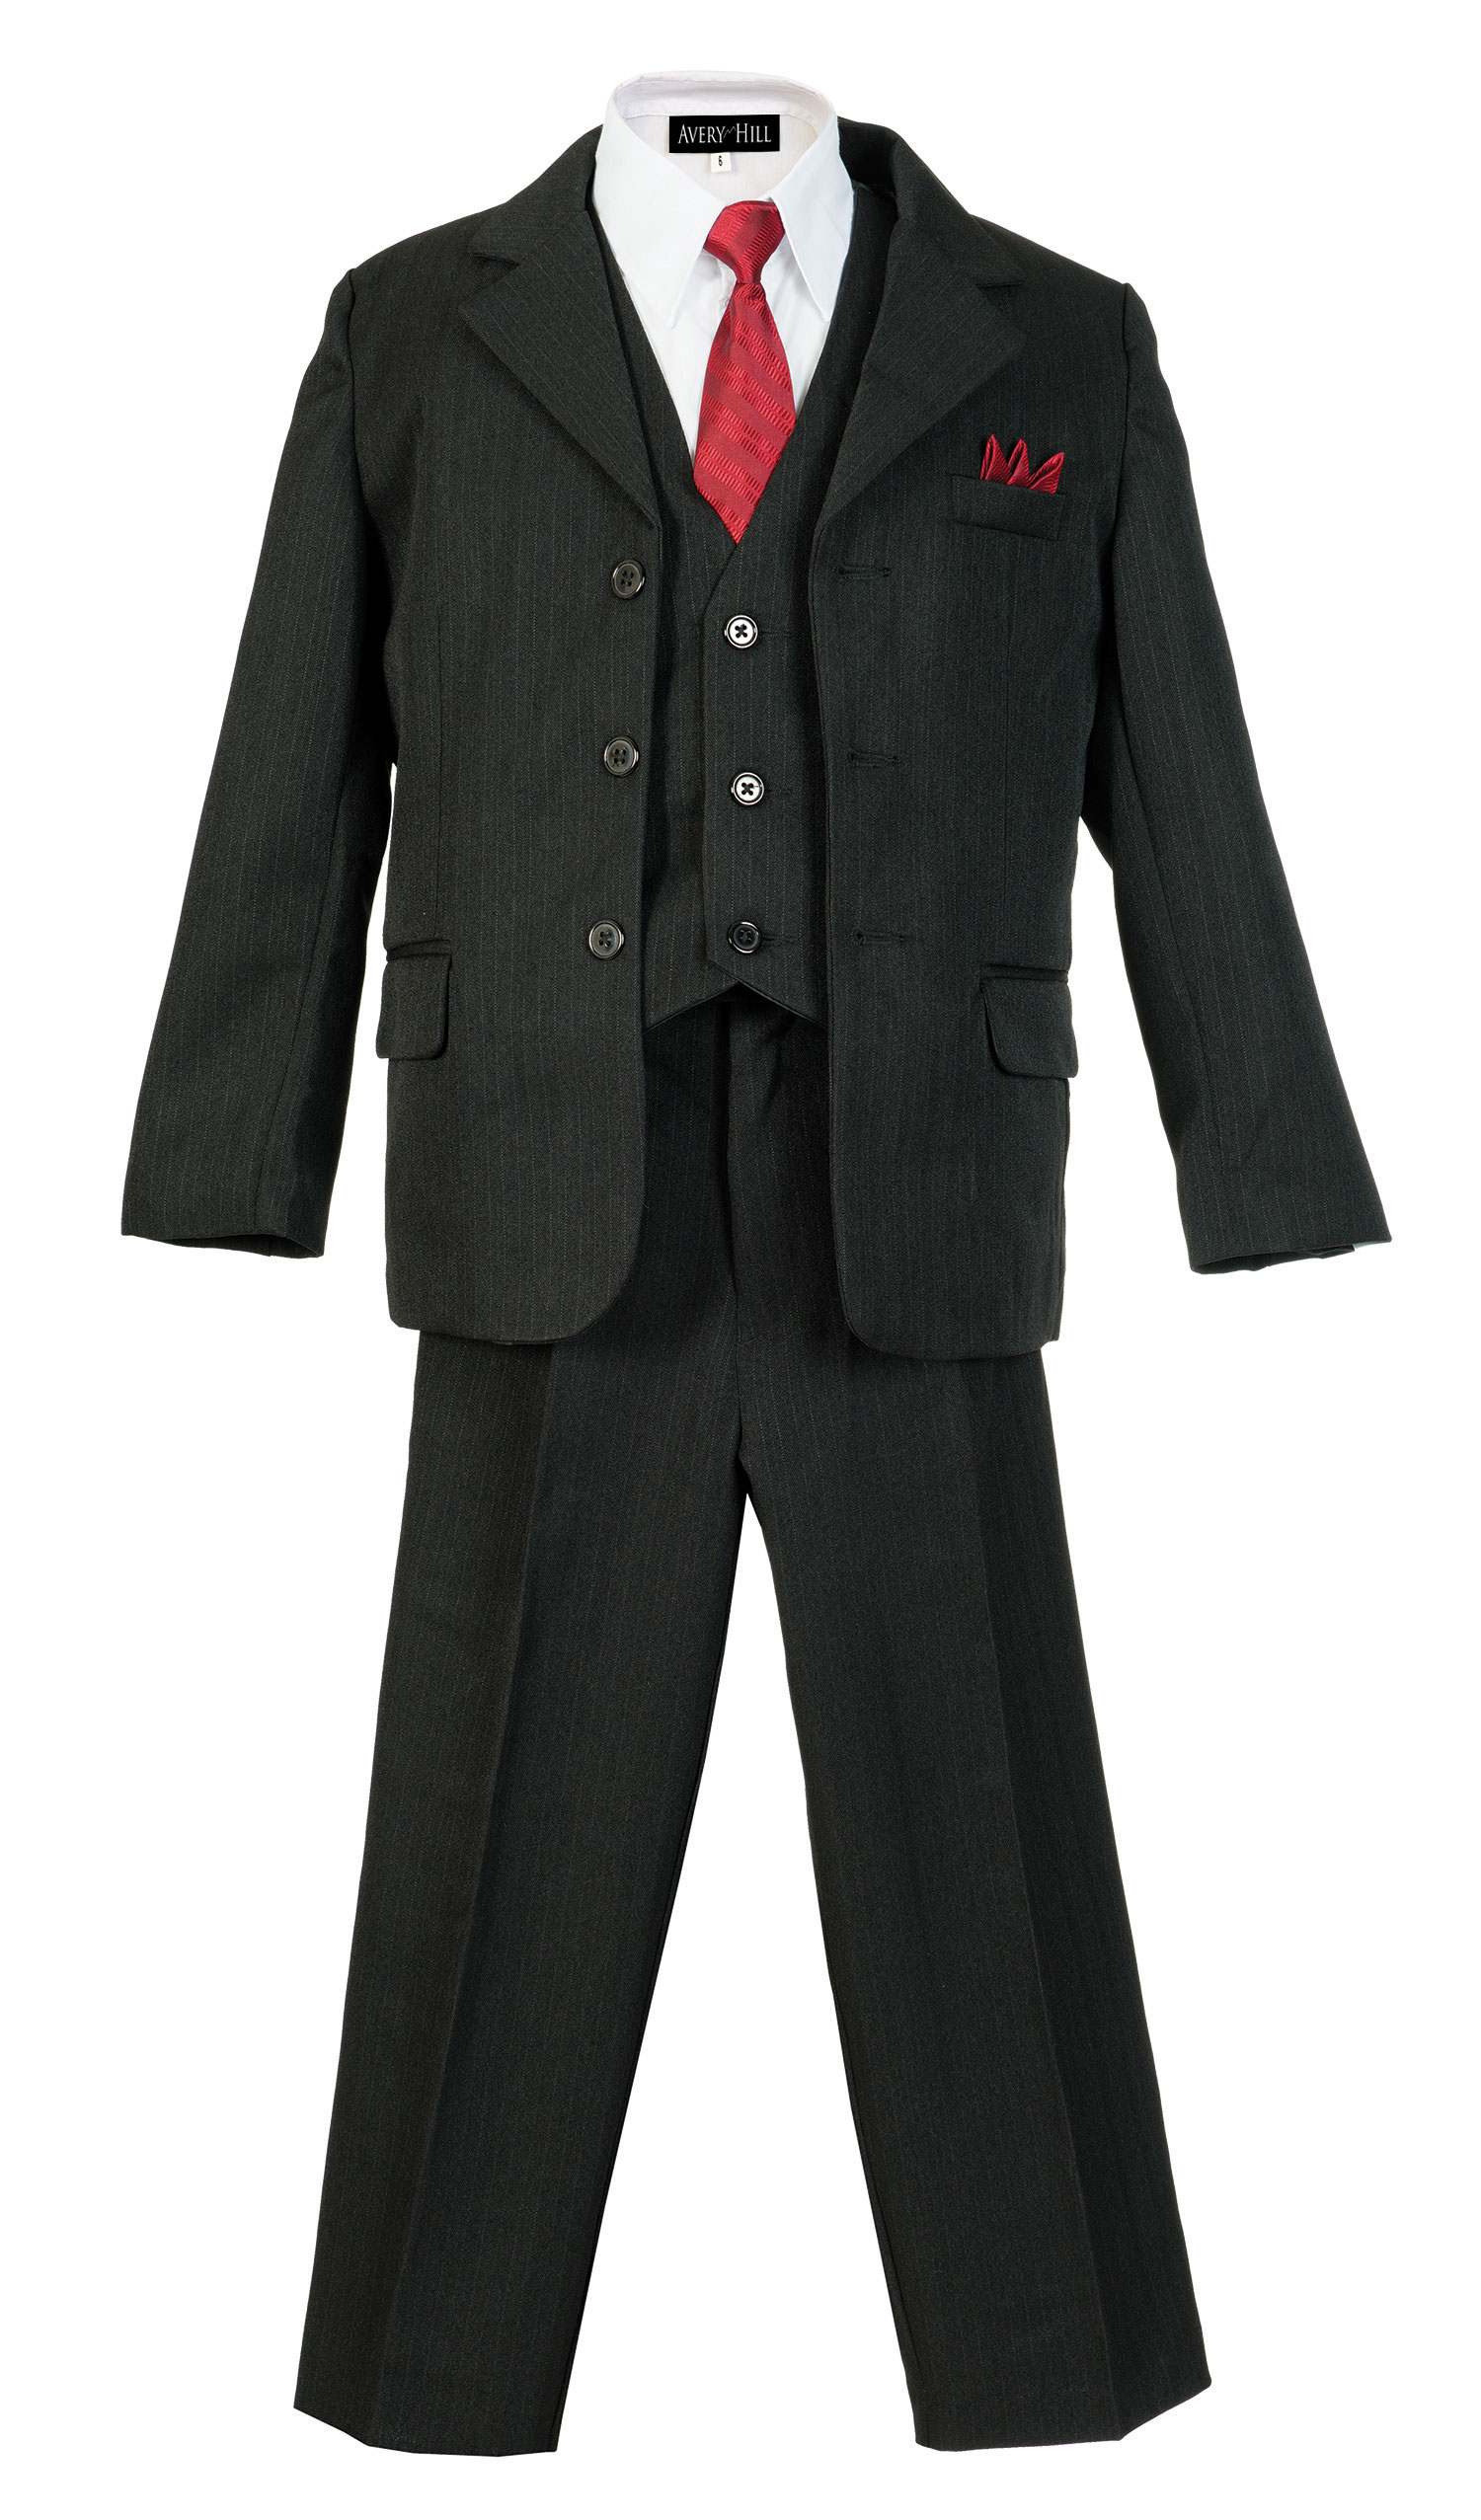 Boys Pinstripe Suit Set with Matching Tie BK 12